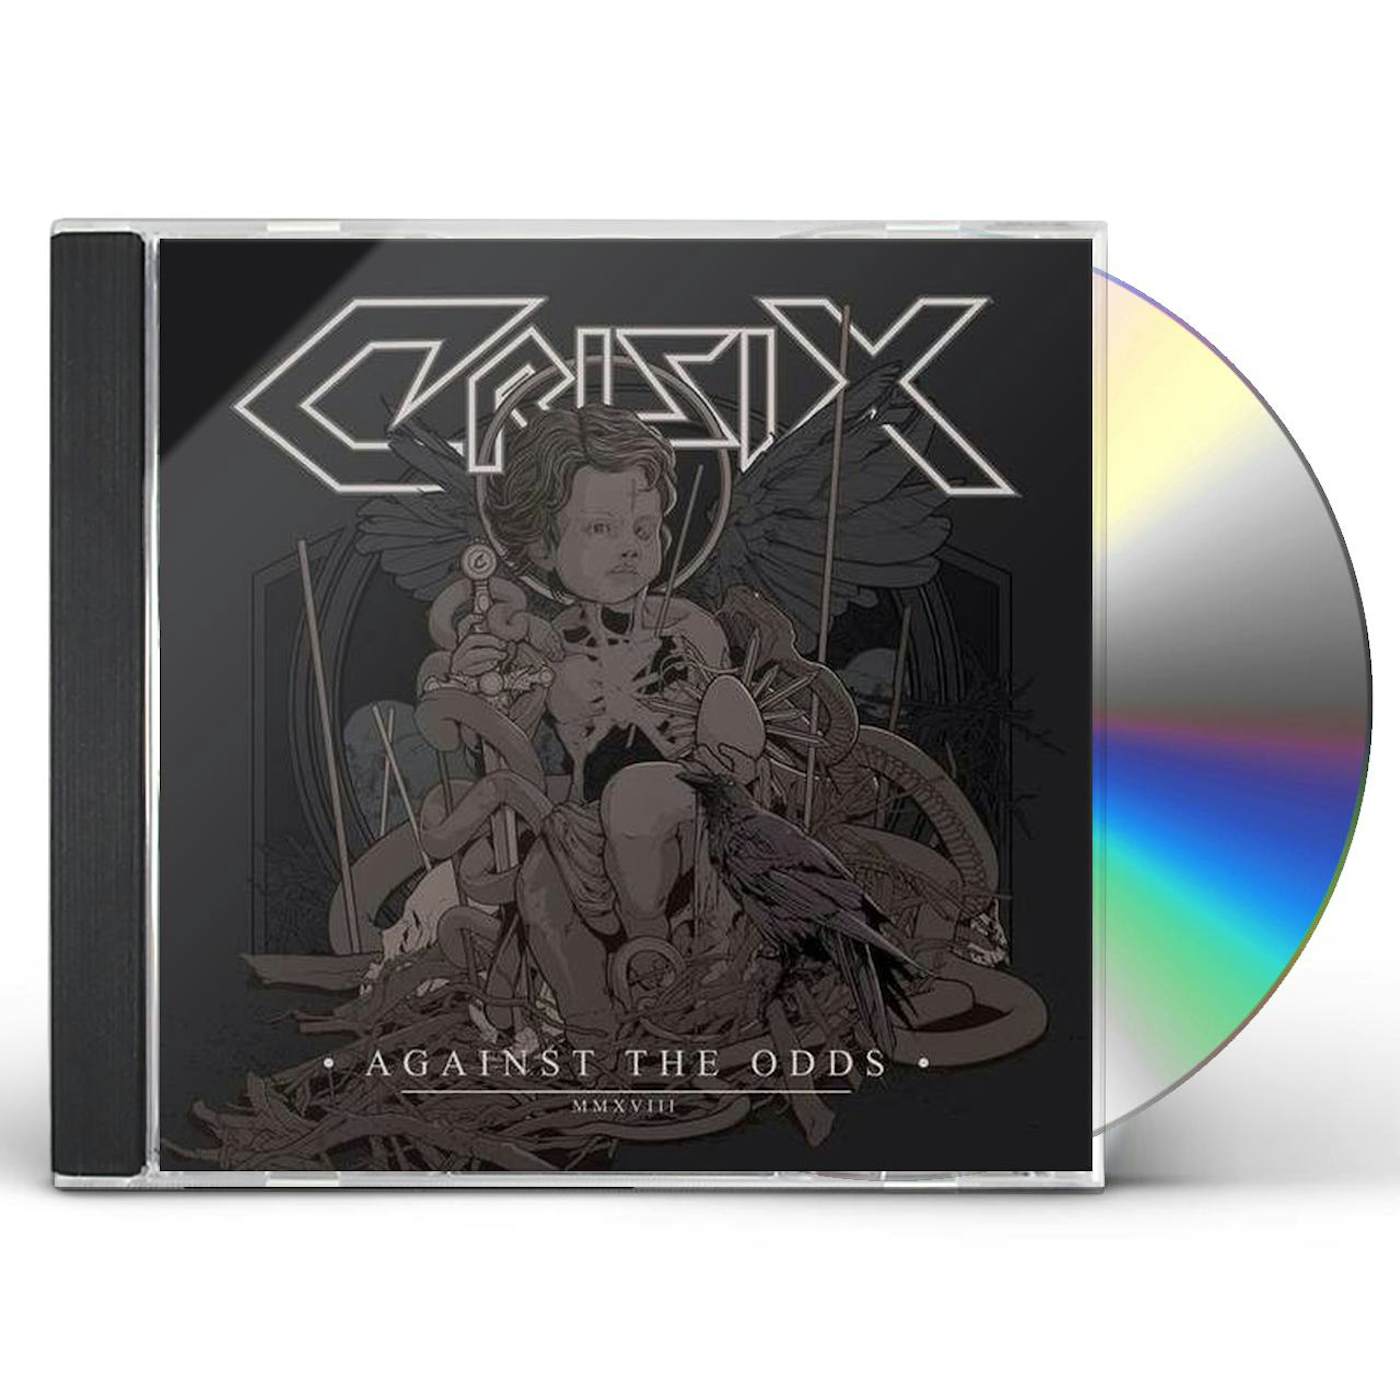 Crisix AGAINST THE ODDS CD